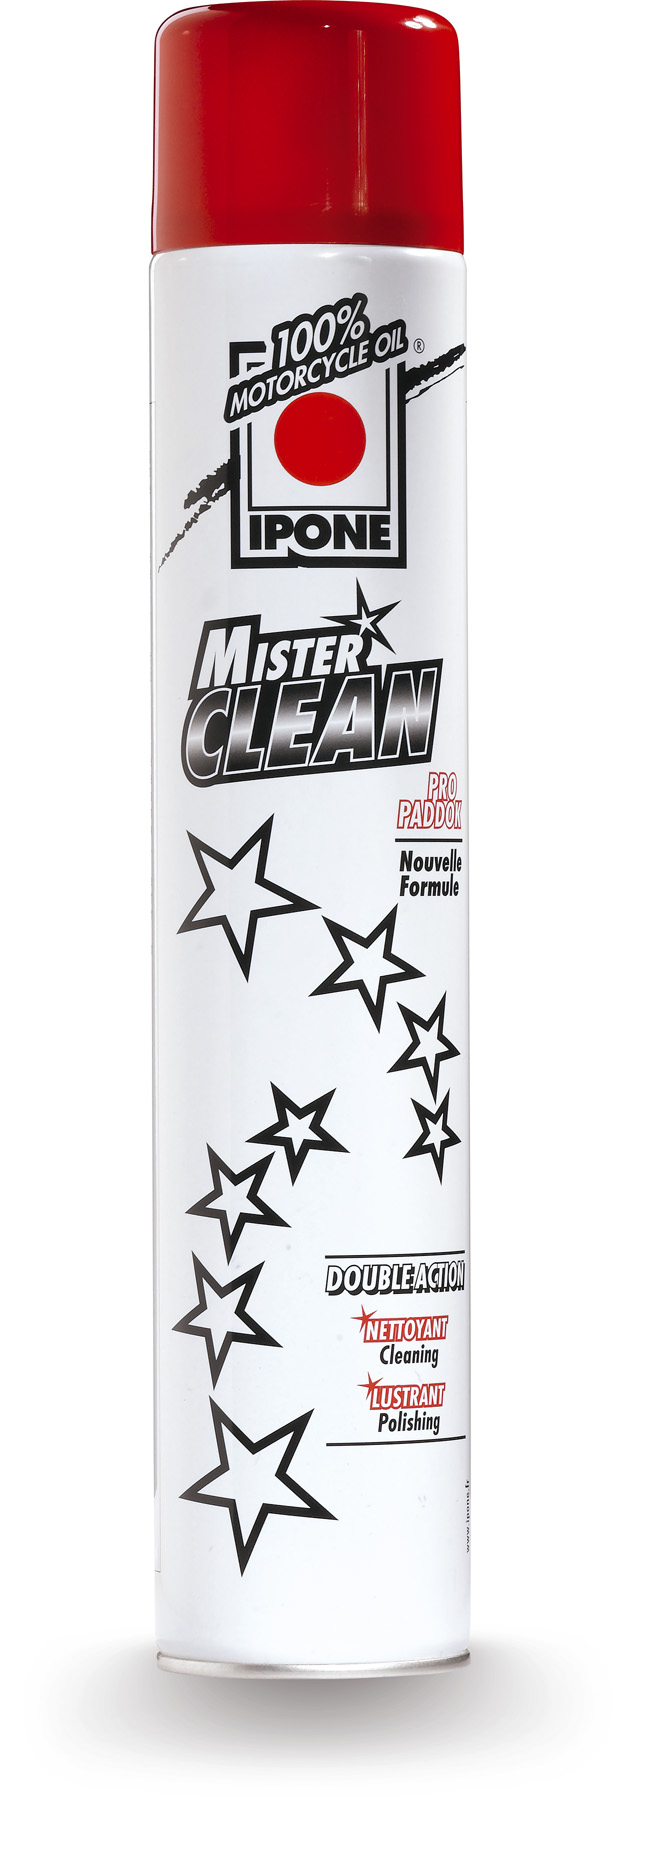 MISTER CLEAN